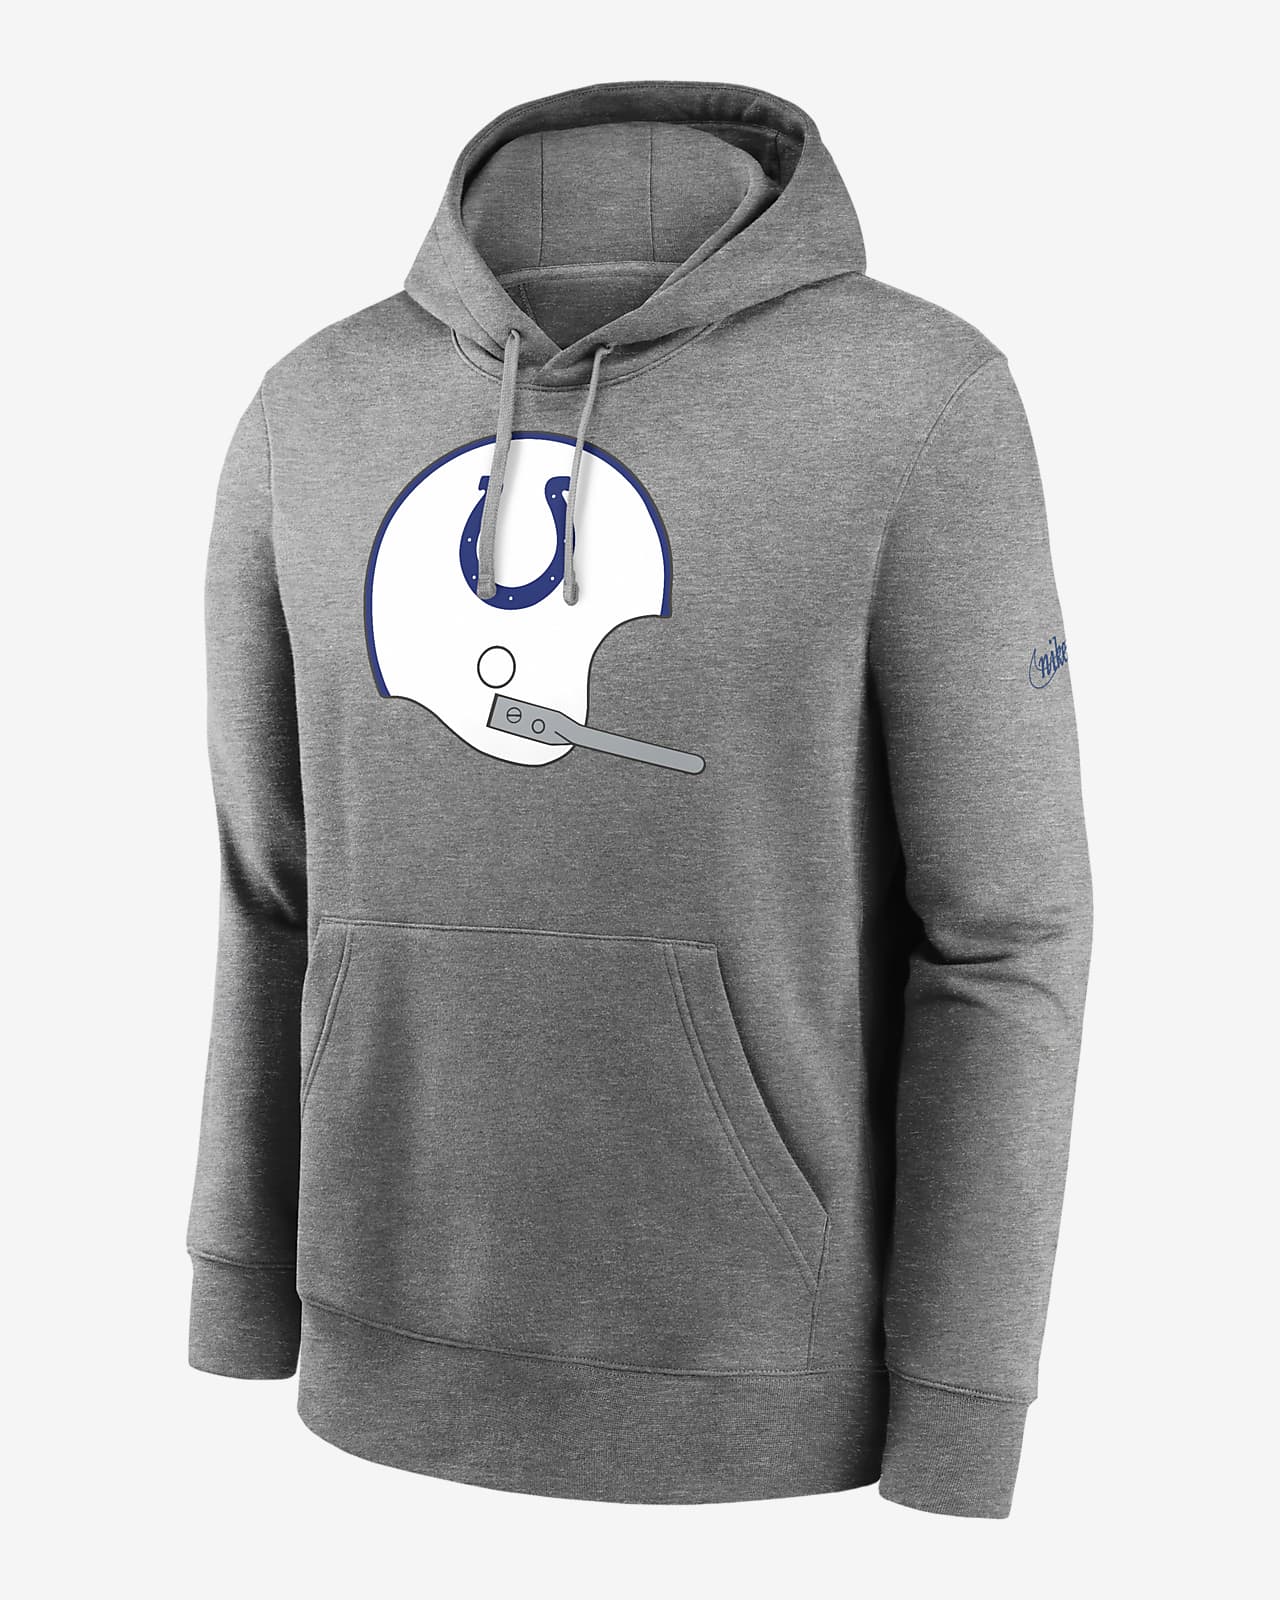 Indianapolis Colts Rewind Club Men’s Nike NFL Pullover Hoodie